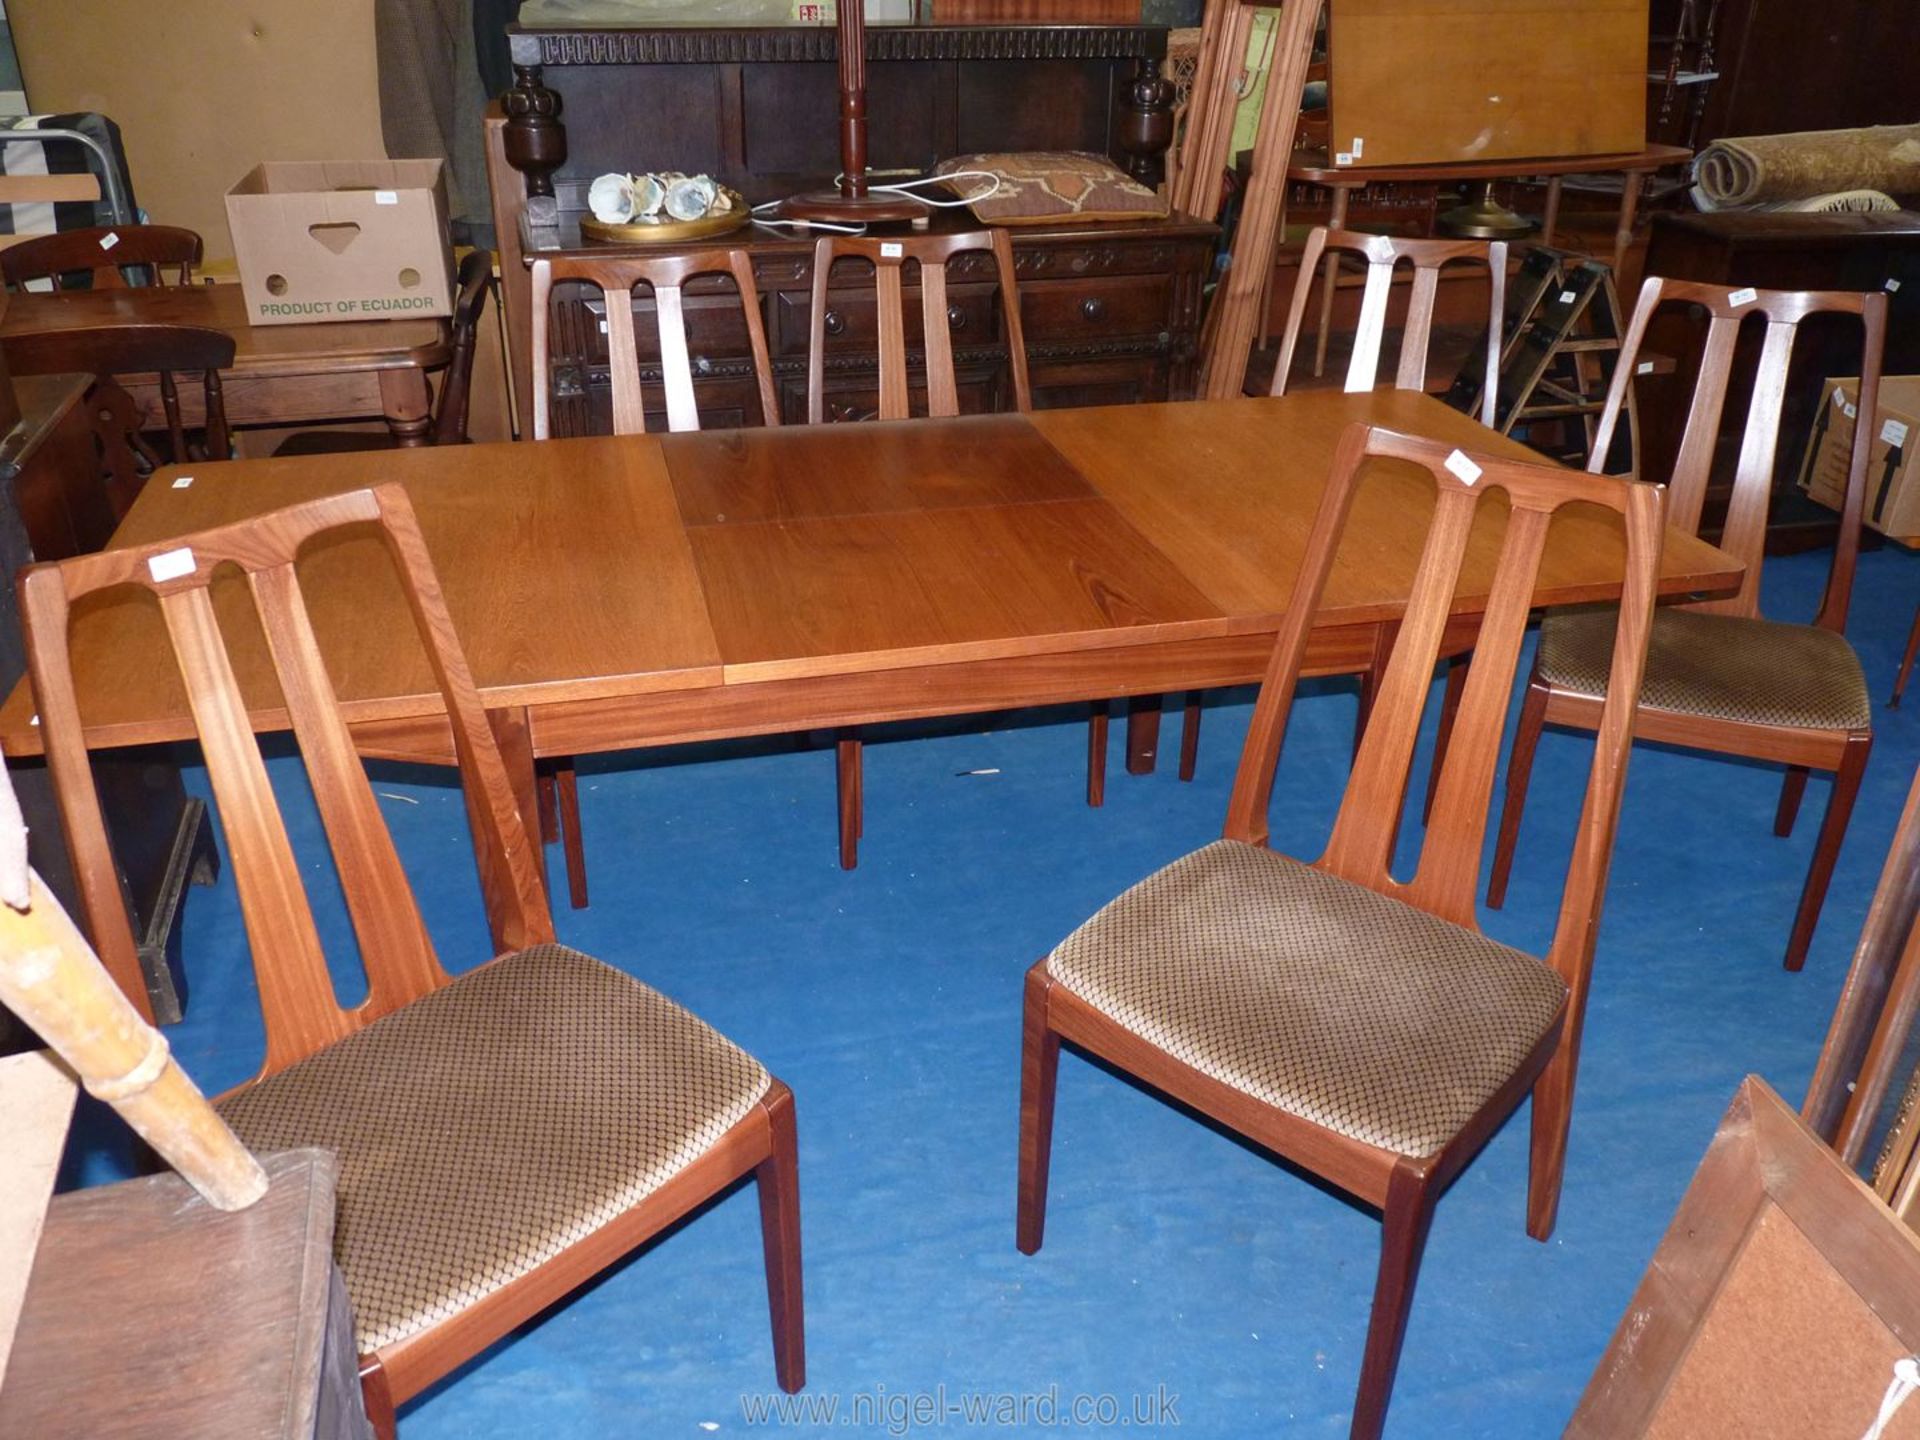 A Nathan extending dining table in a darkwood finish with 6 chairs having geometric upholstered